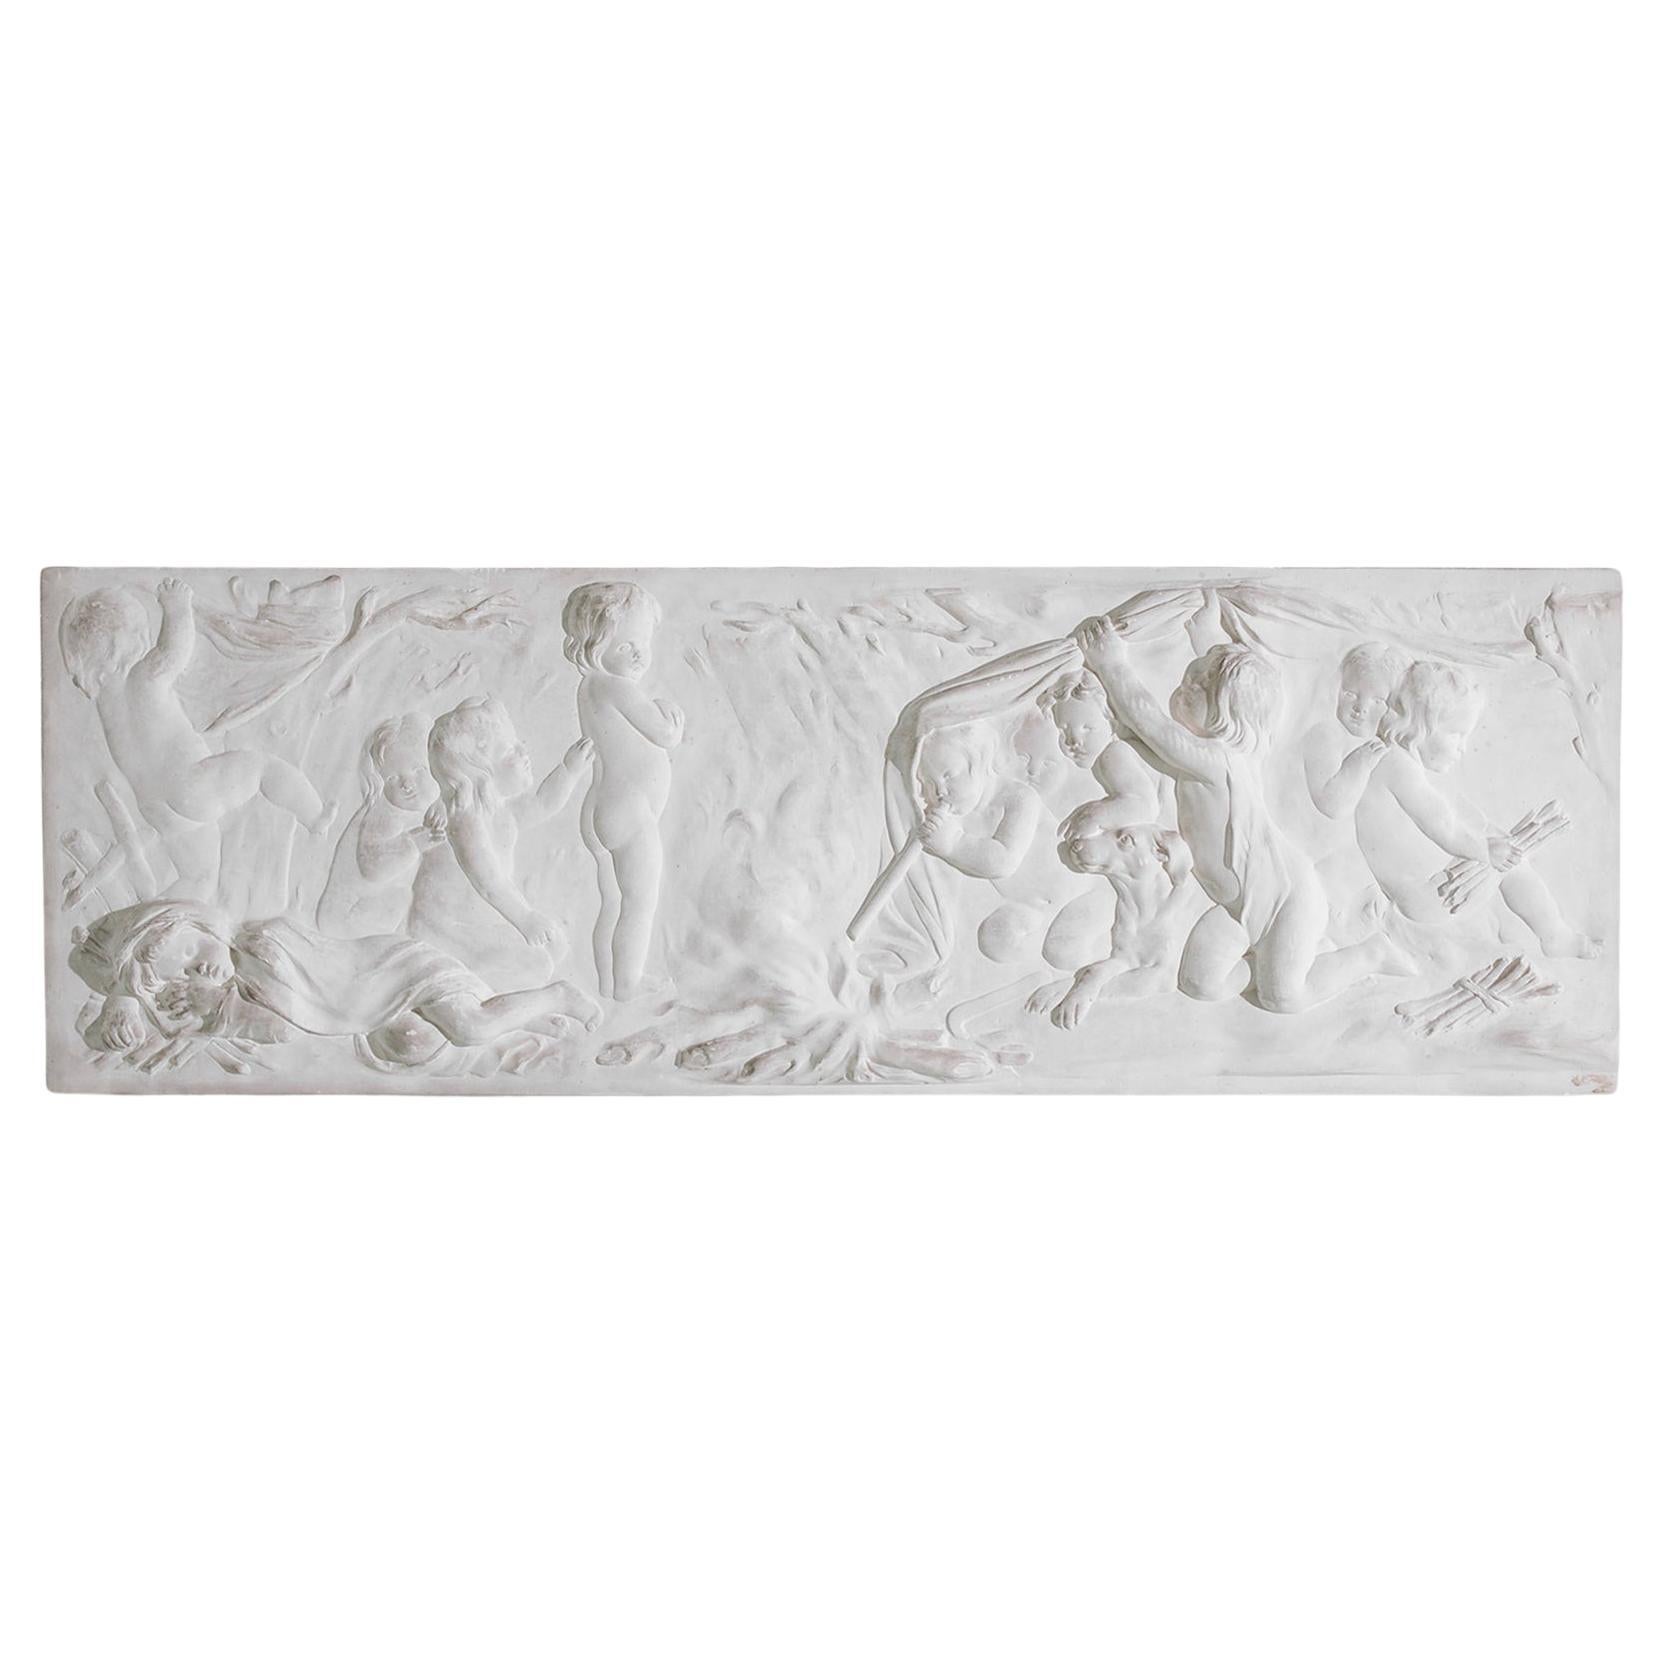 1930s French Plaster Wall Relief